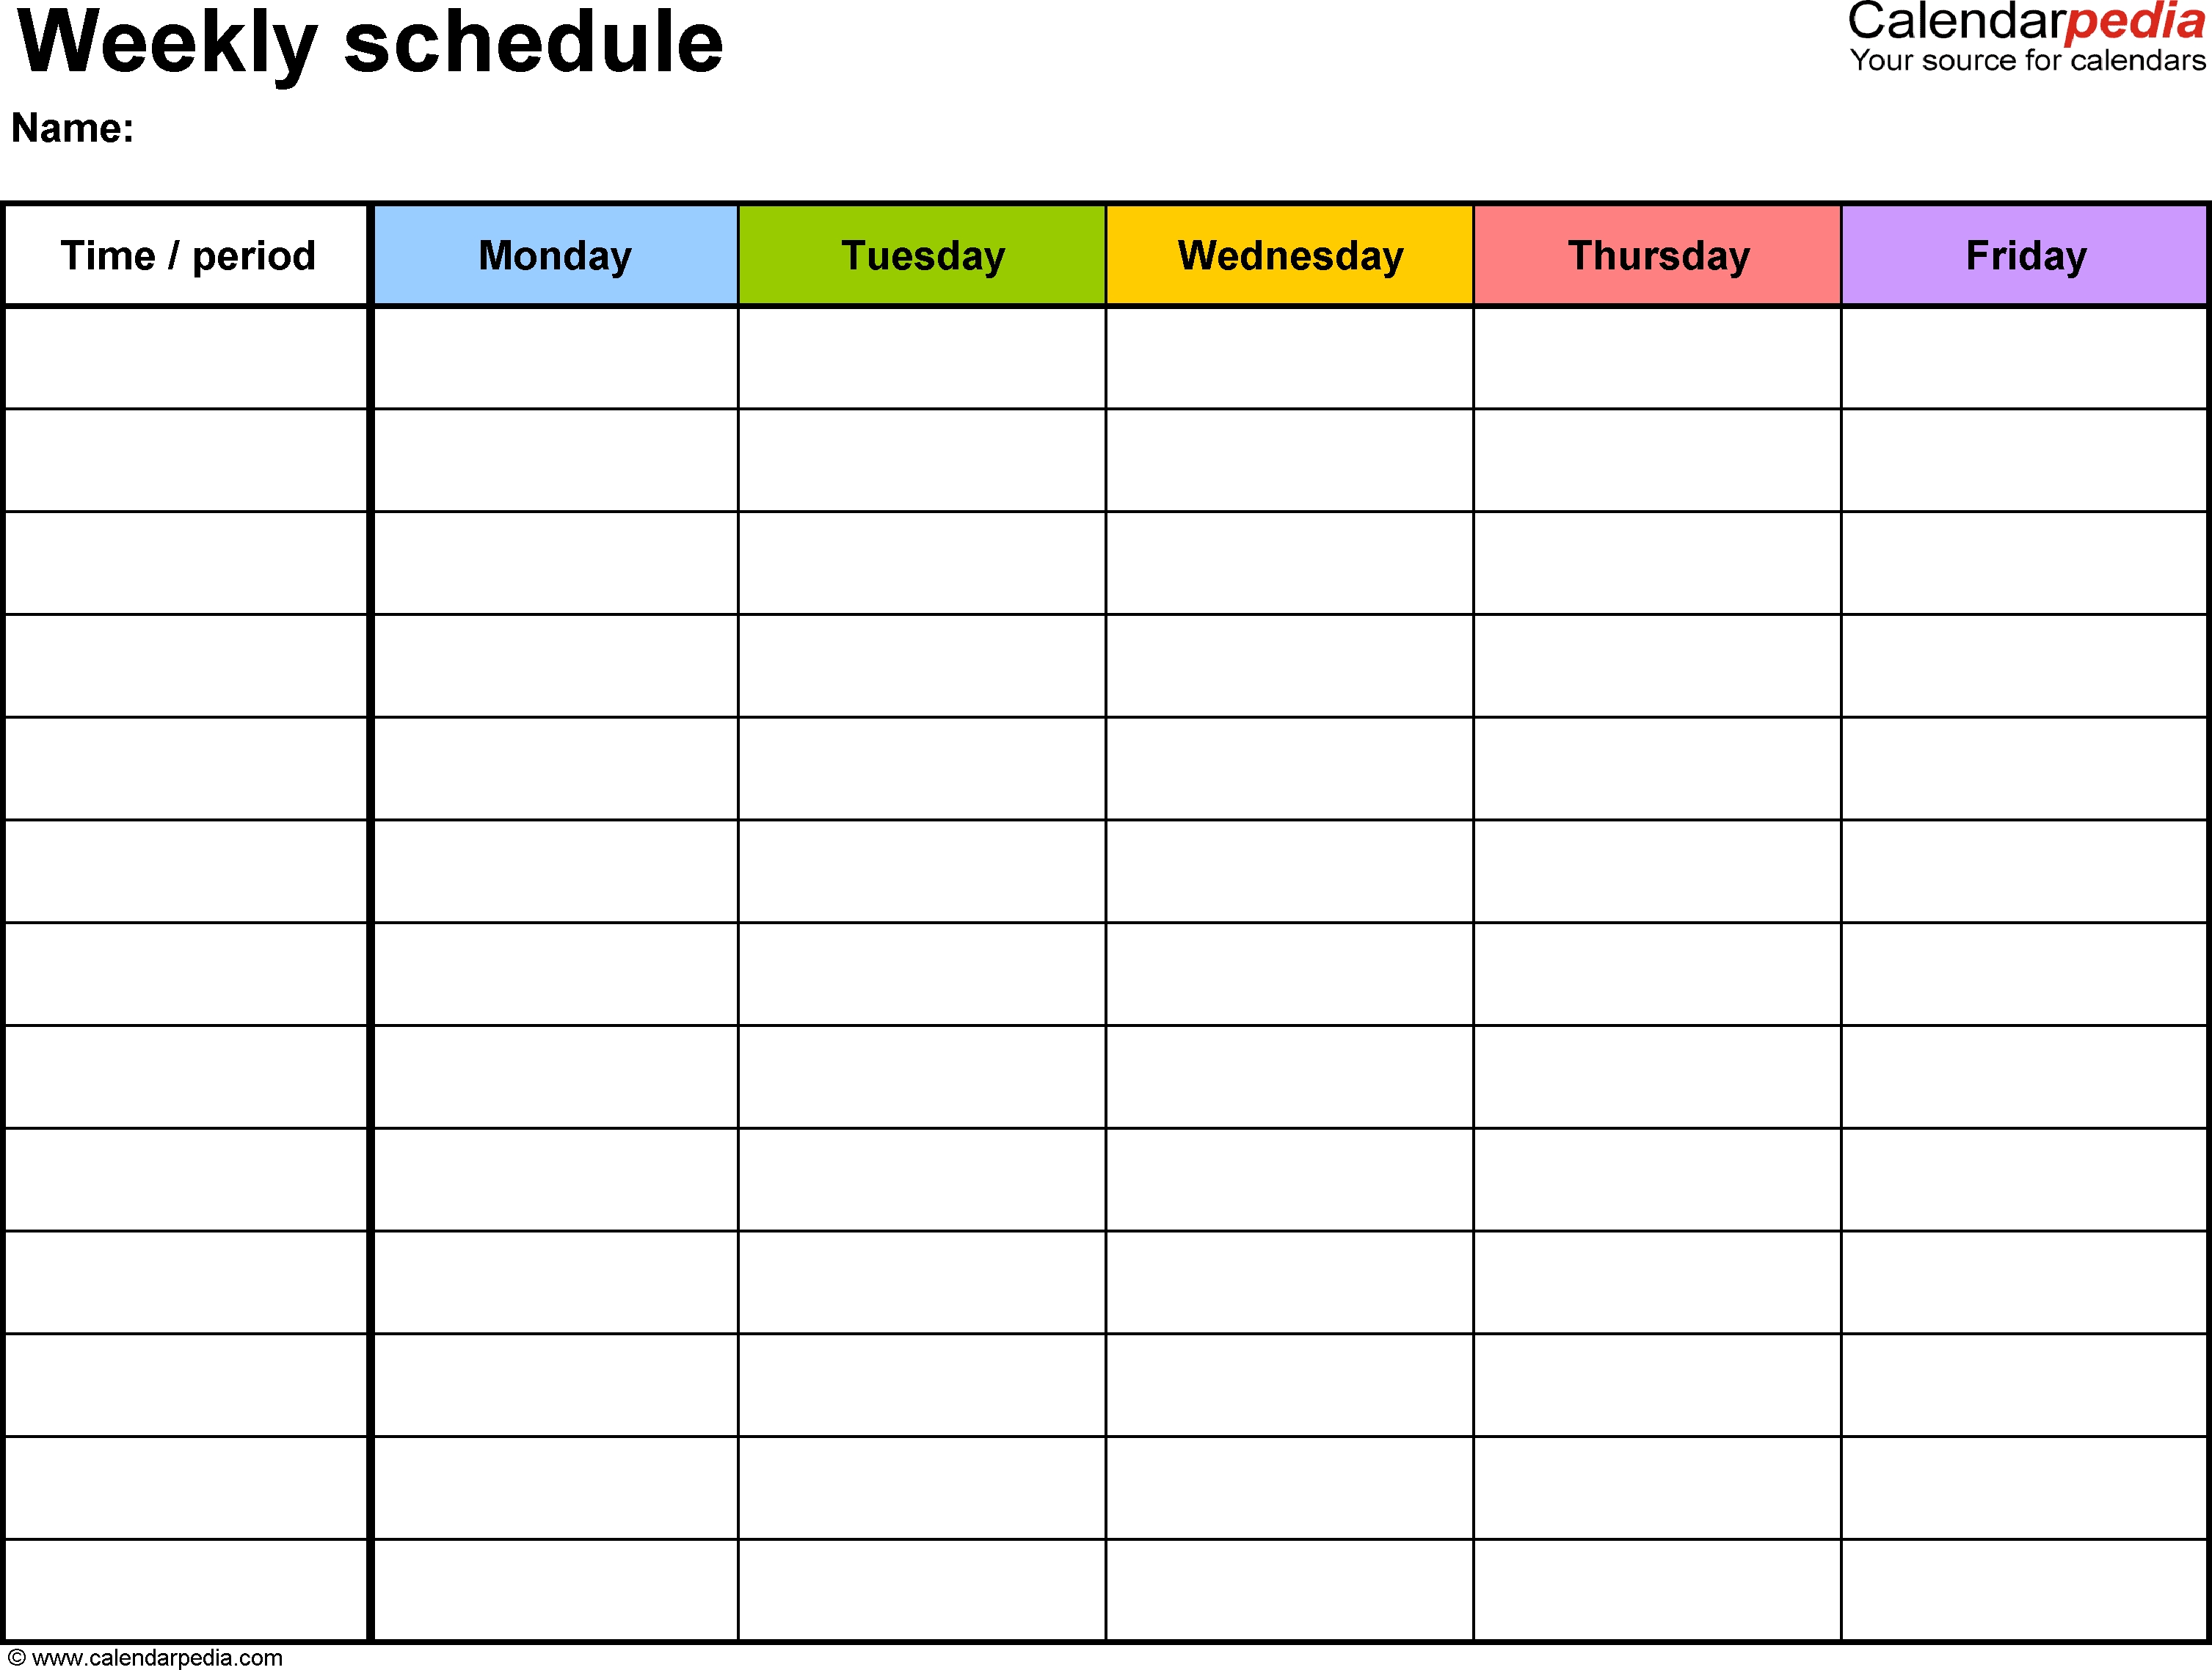 Free Weekly Schedule Templates For Word - 18 Templates-Free Printable Monday-Friday Monthly Calendar